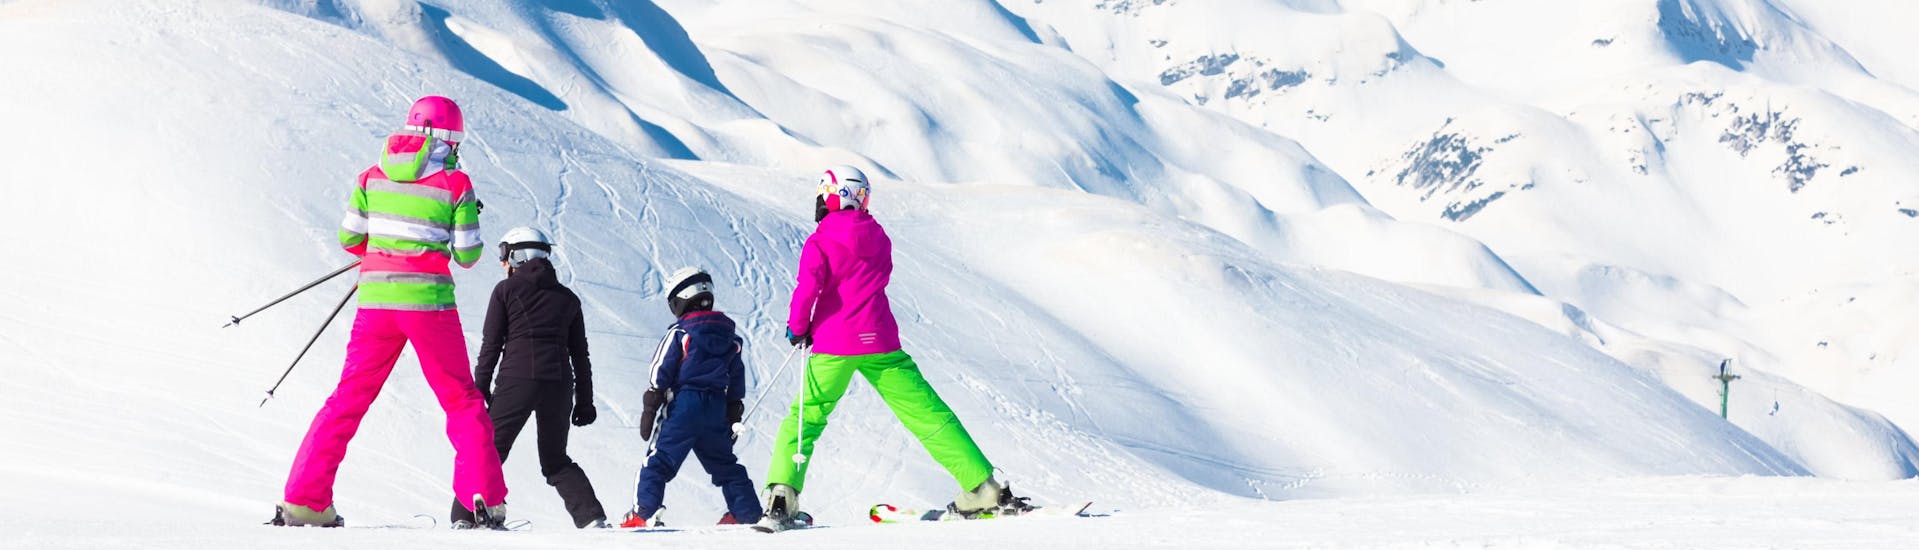 A family is skiing down the slopes of Vogel Ski Center in Slovenia, where local ski schools offer their ski lessons.